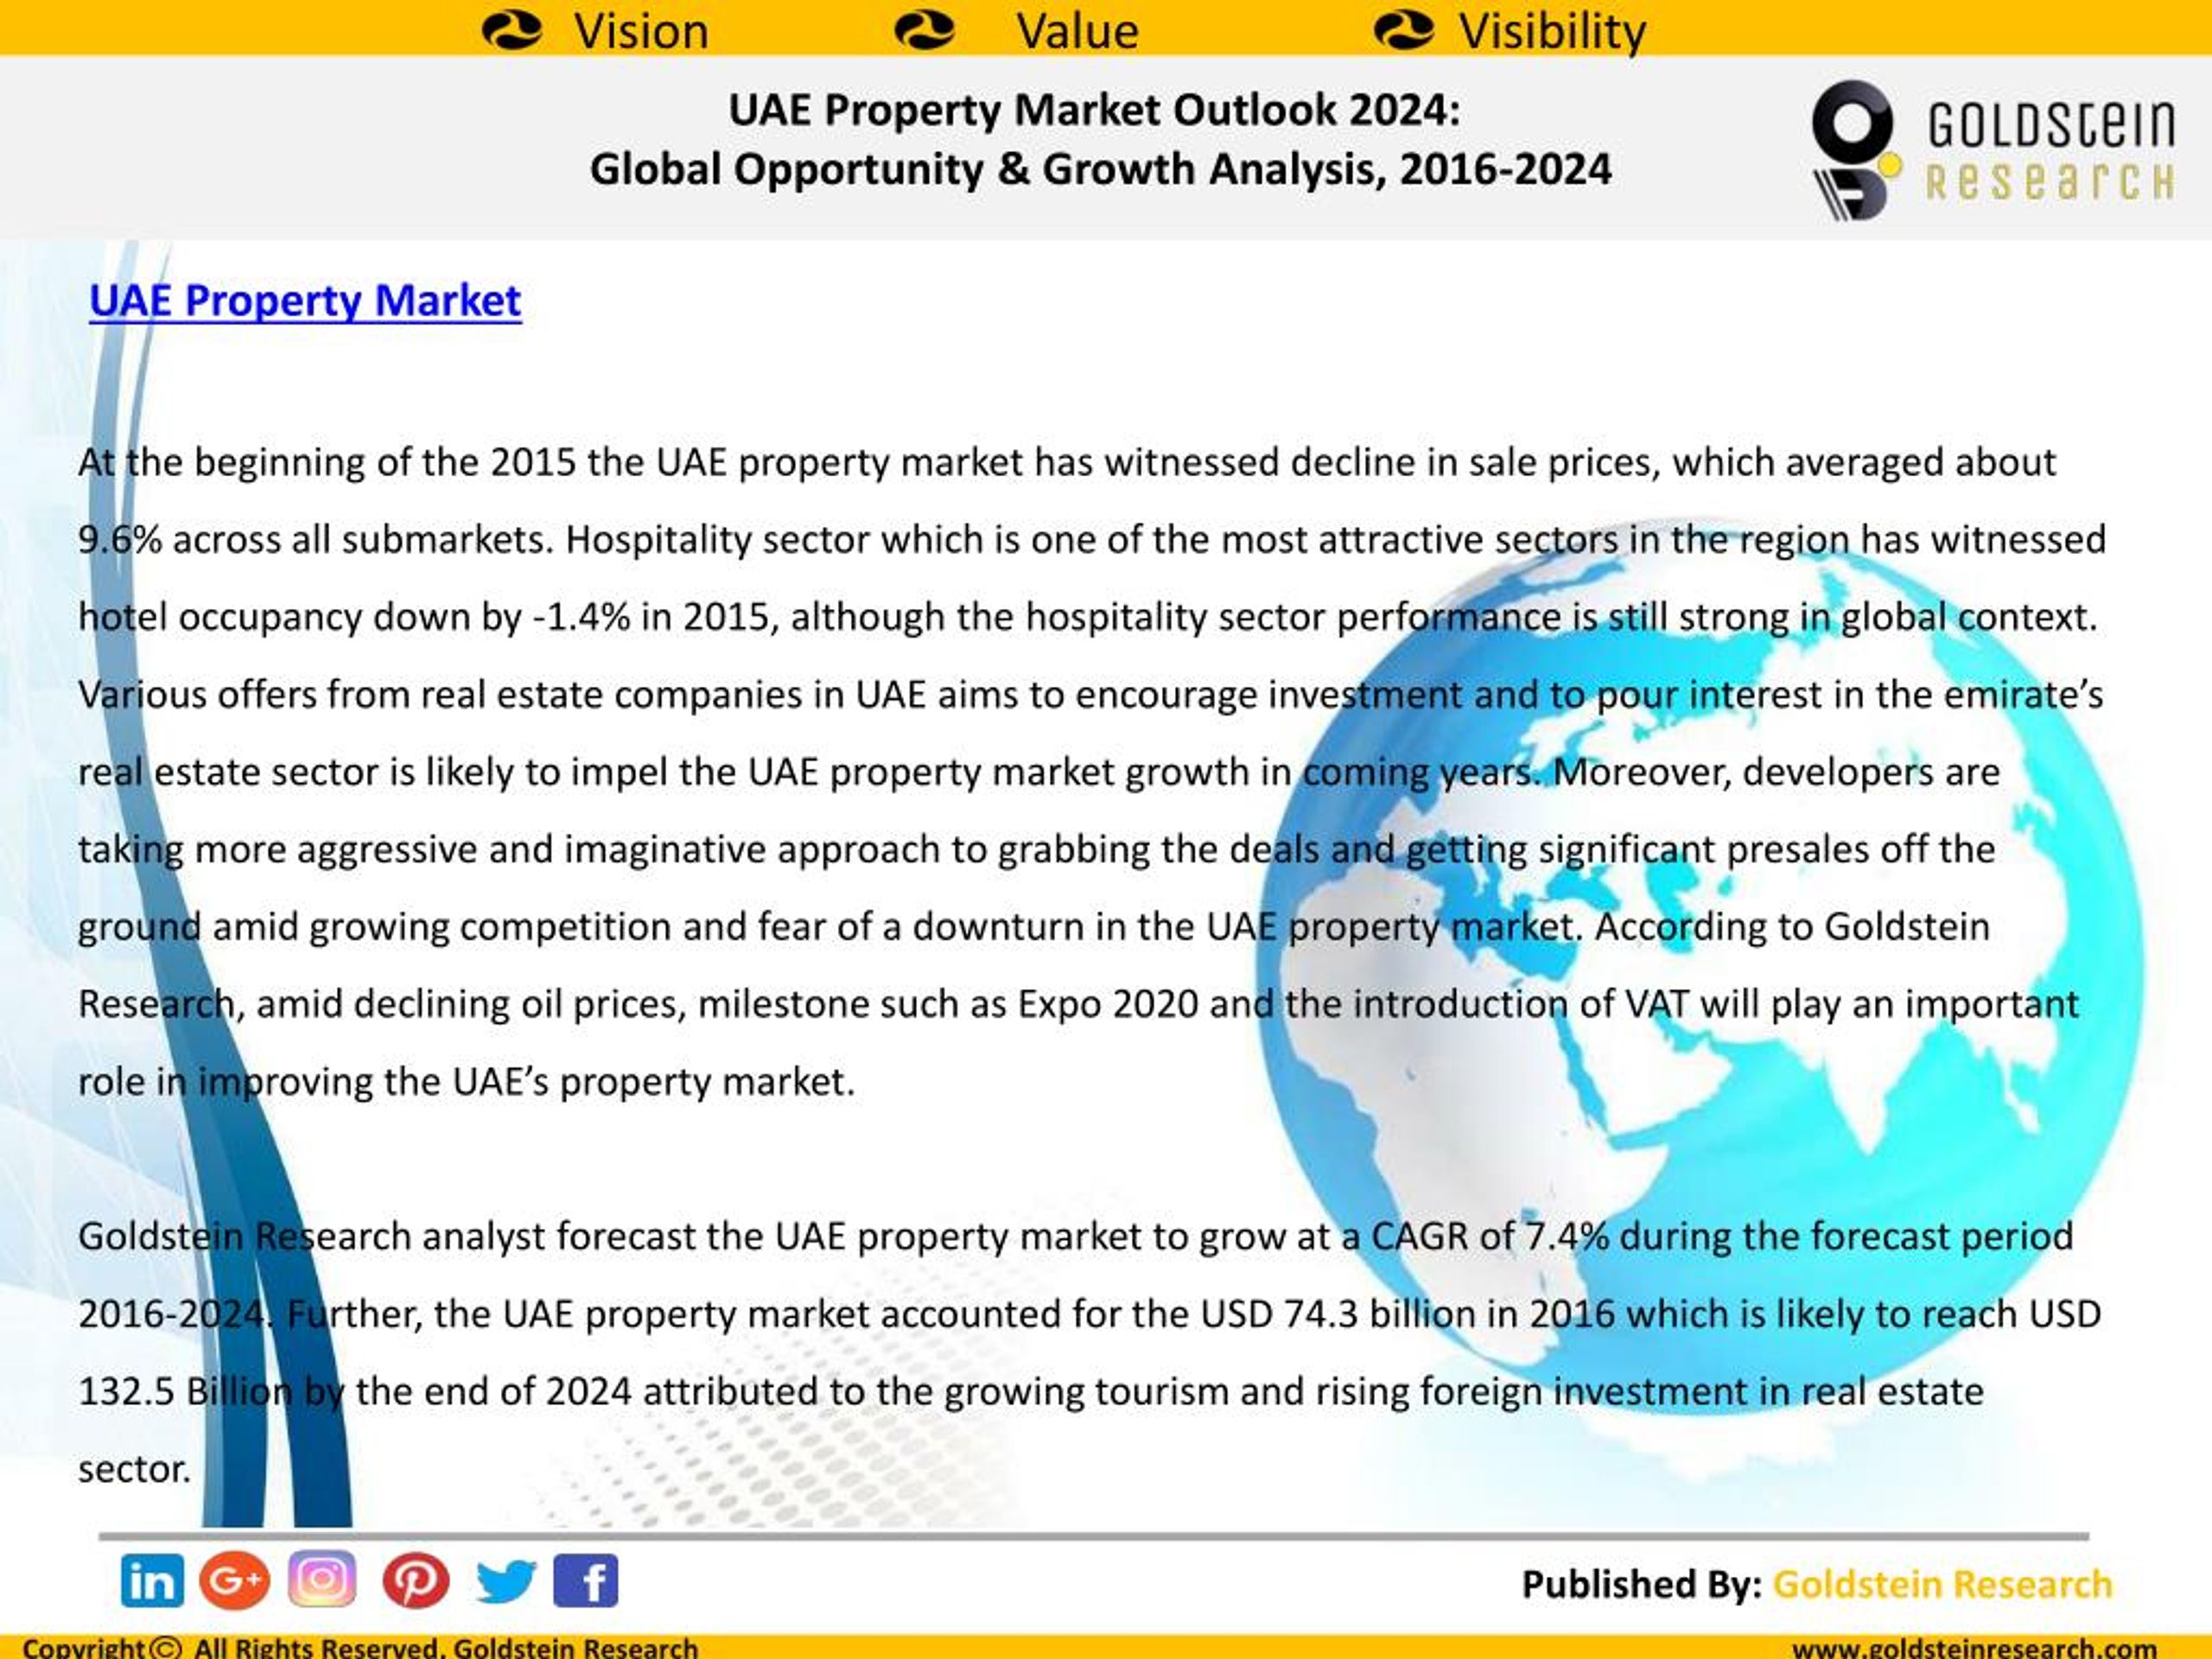 PPT UAE Property Market Outlook 2024 Global Opportunity & Growth